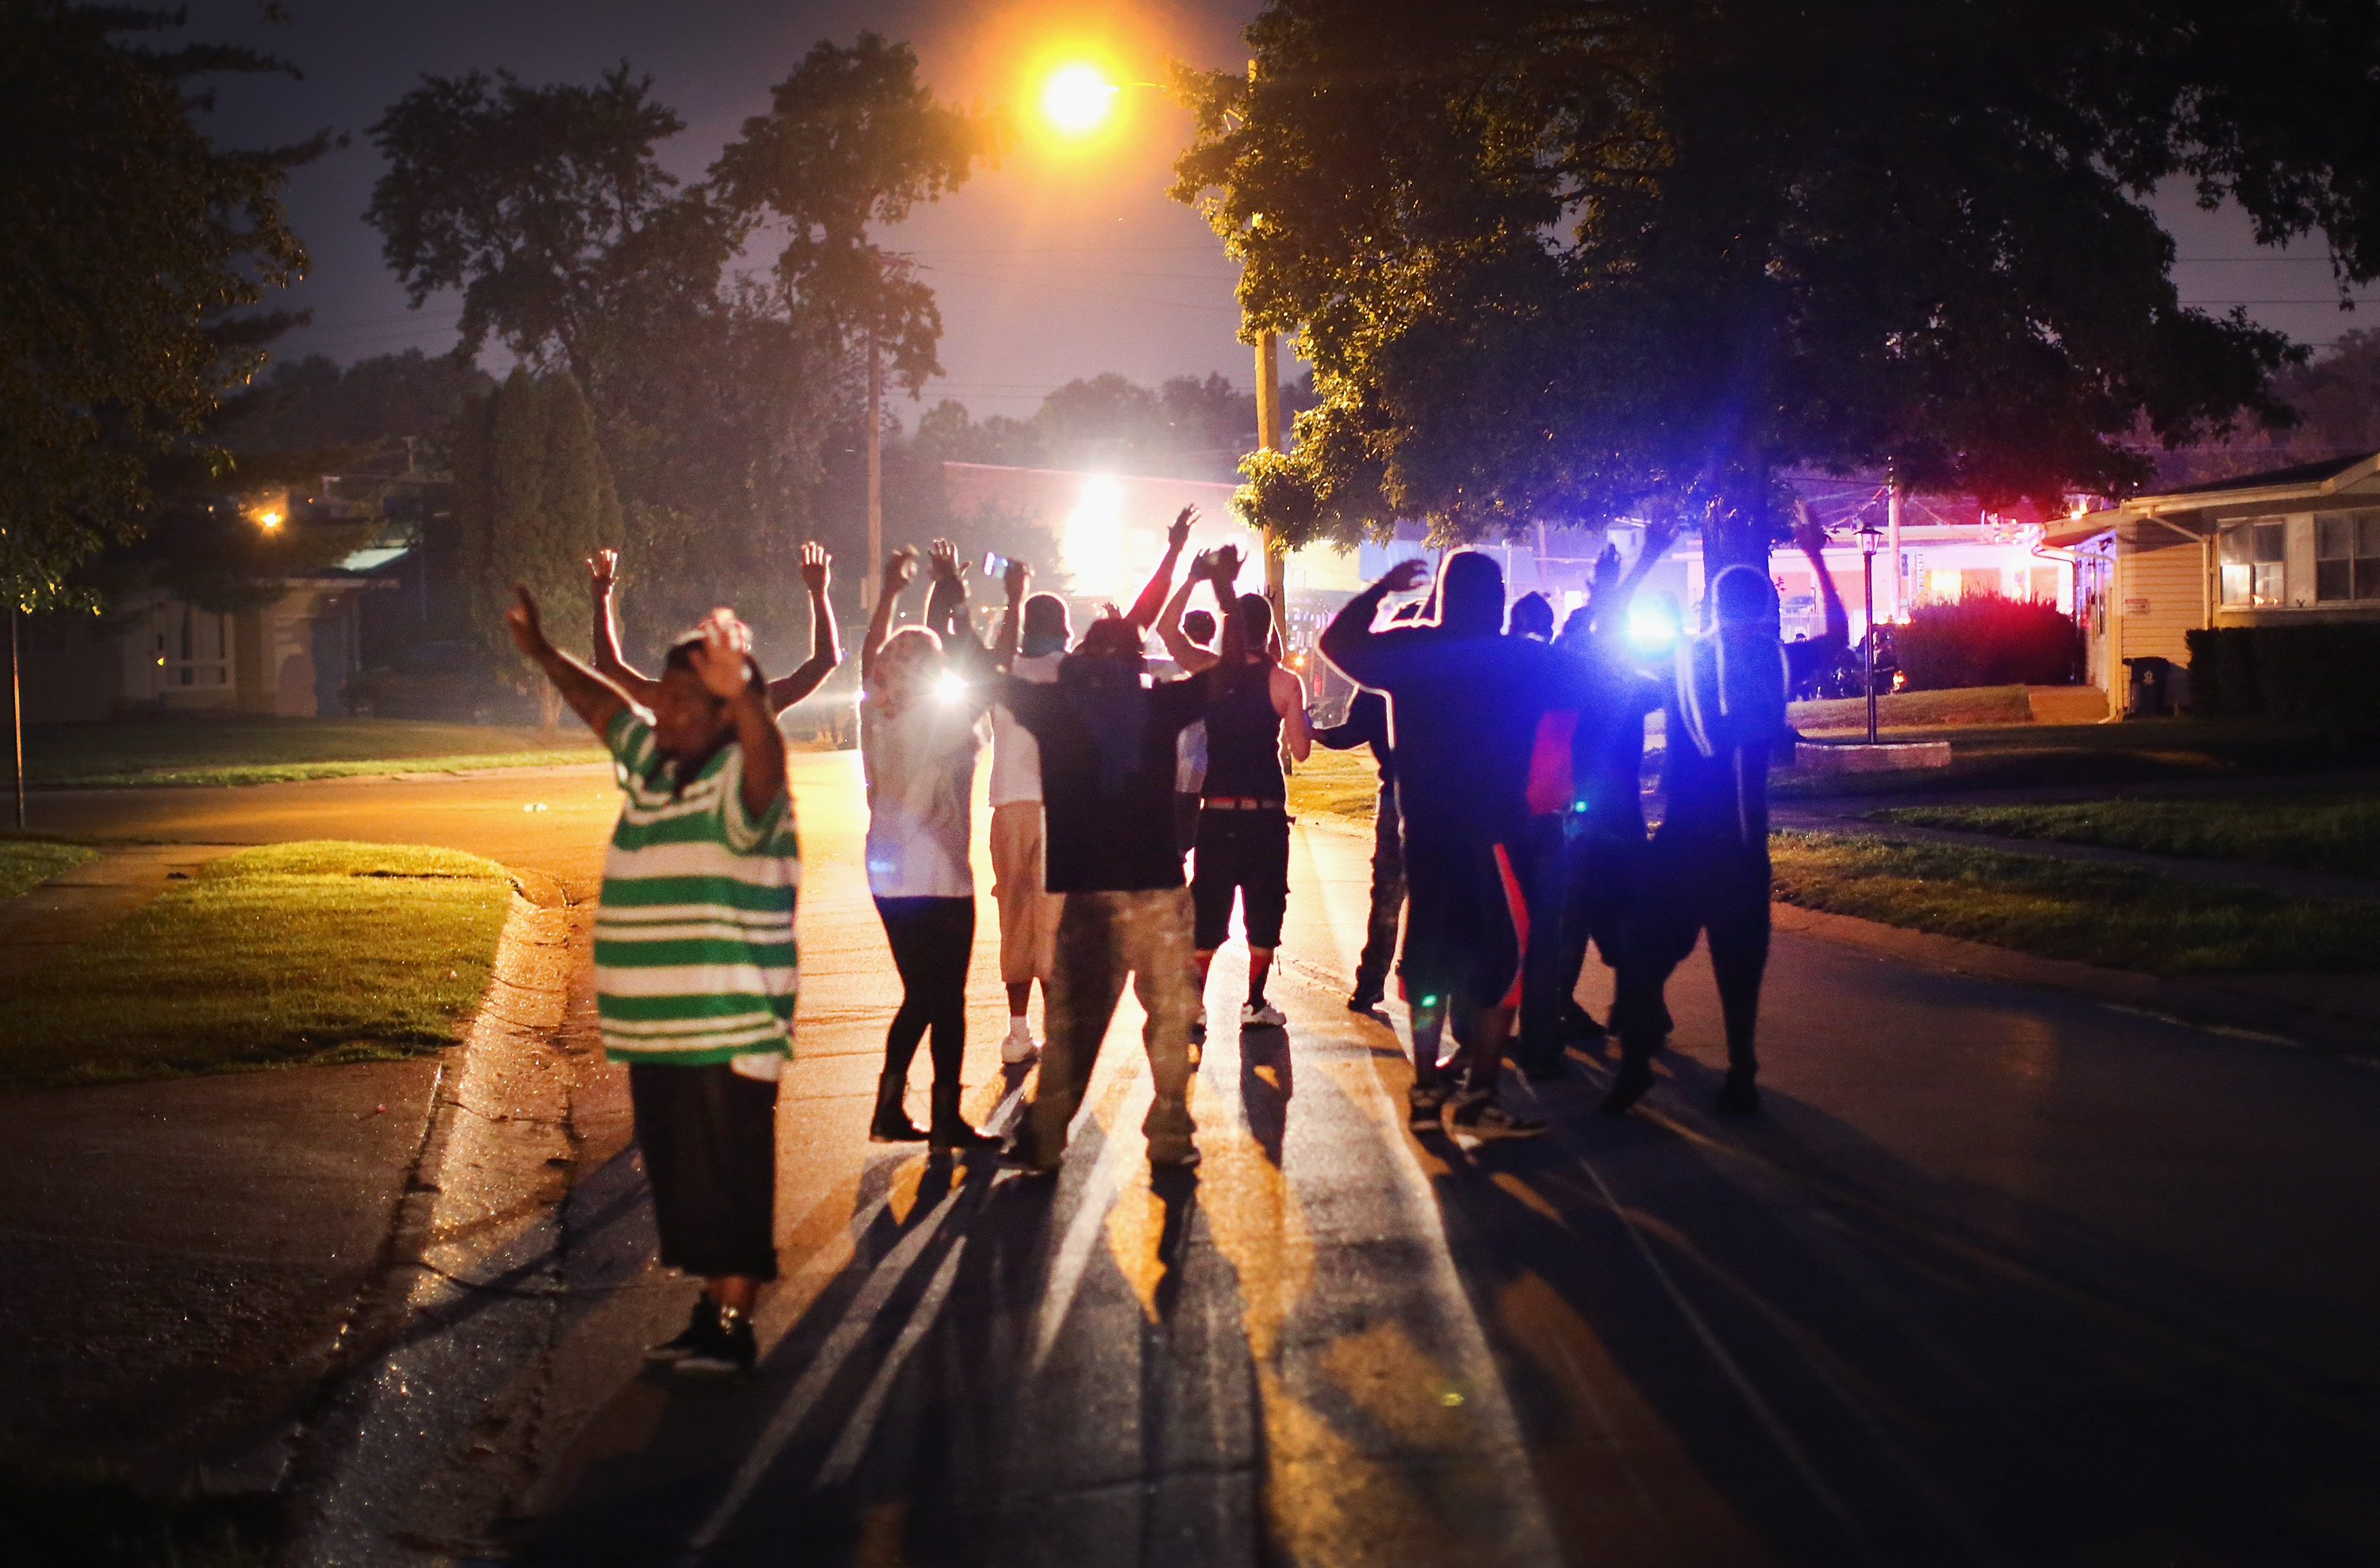 With their hands raised, residents gather at a police line as the neighborhood is locked down following skirmishes on August 11, 2014 in Ferguson, Missouri. (Scott Olson—Getty Images)